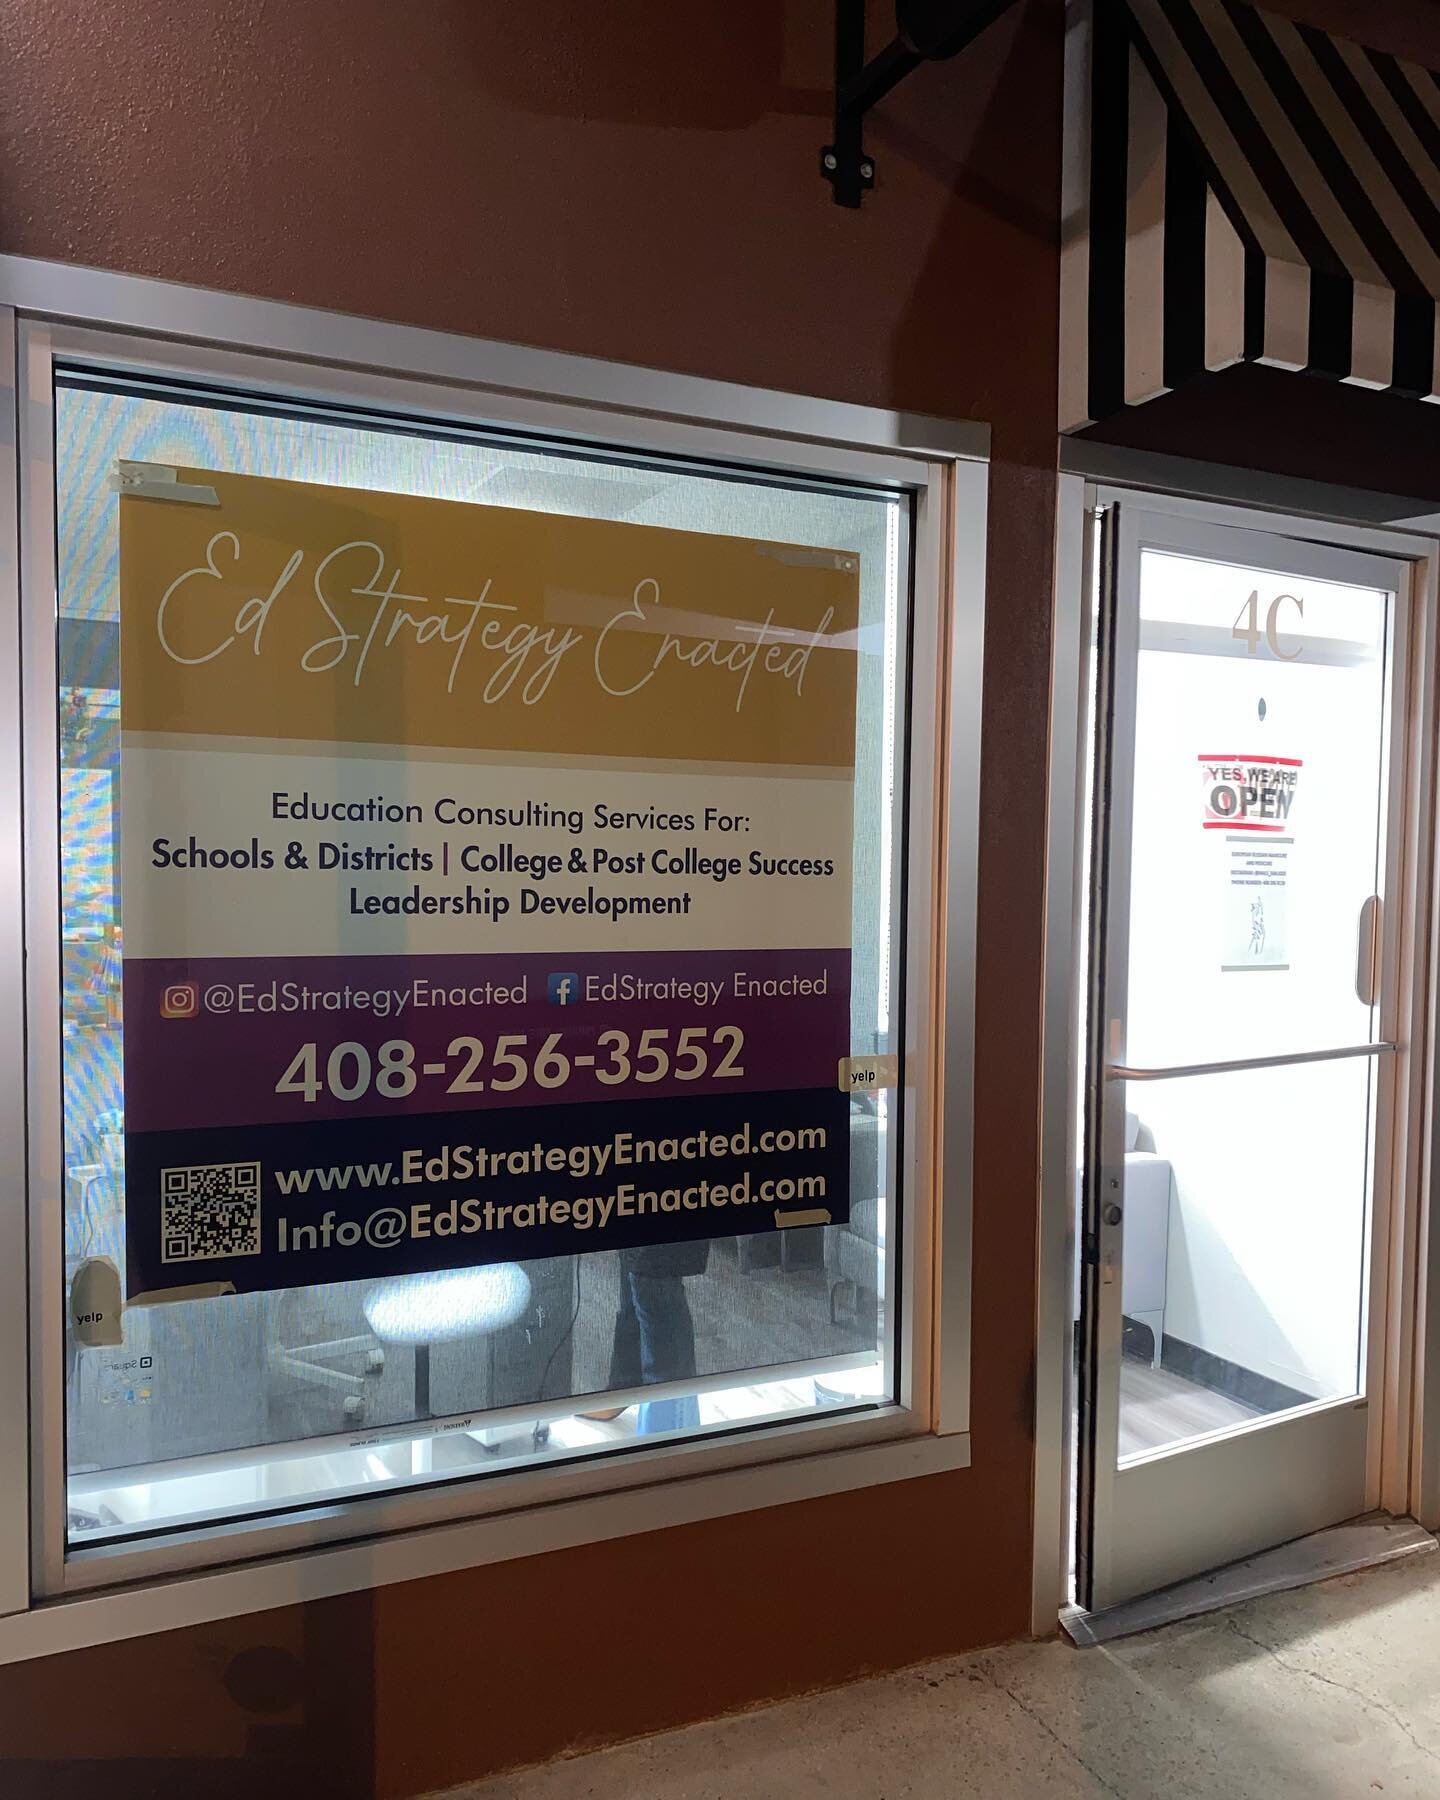 New window sign at the @edstrategyenacted office to match our new website branding!